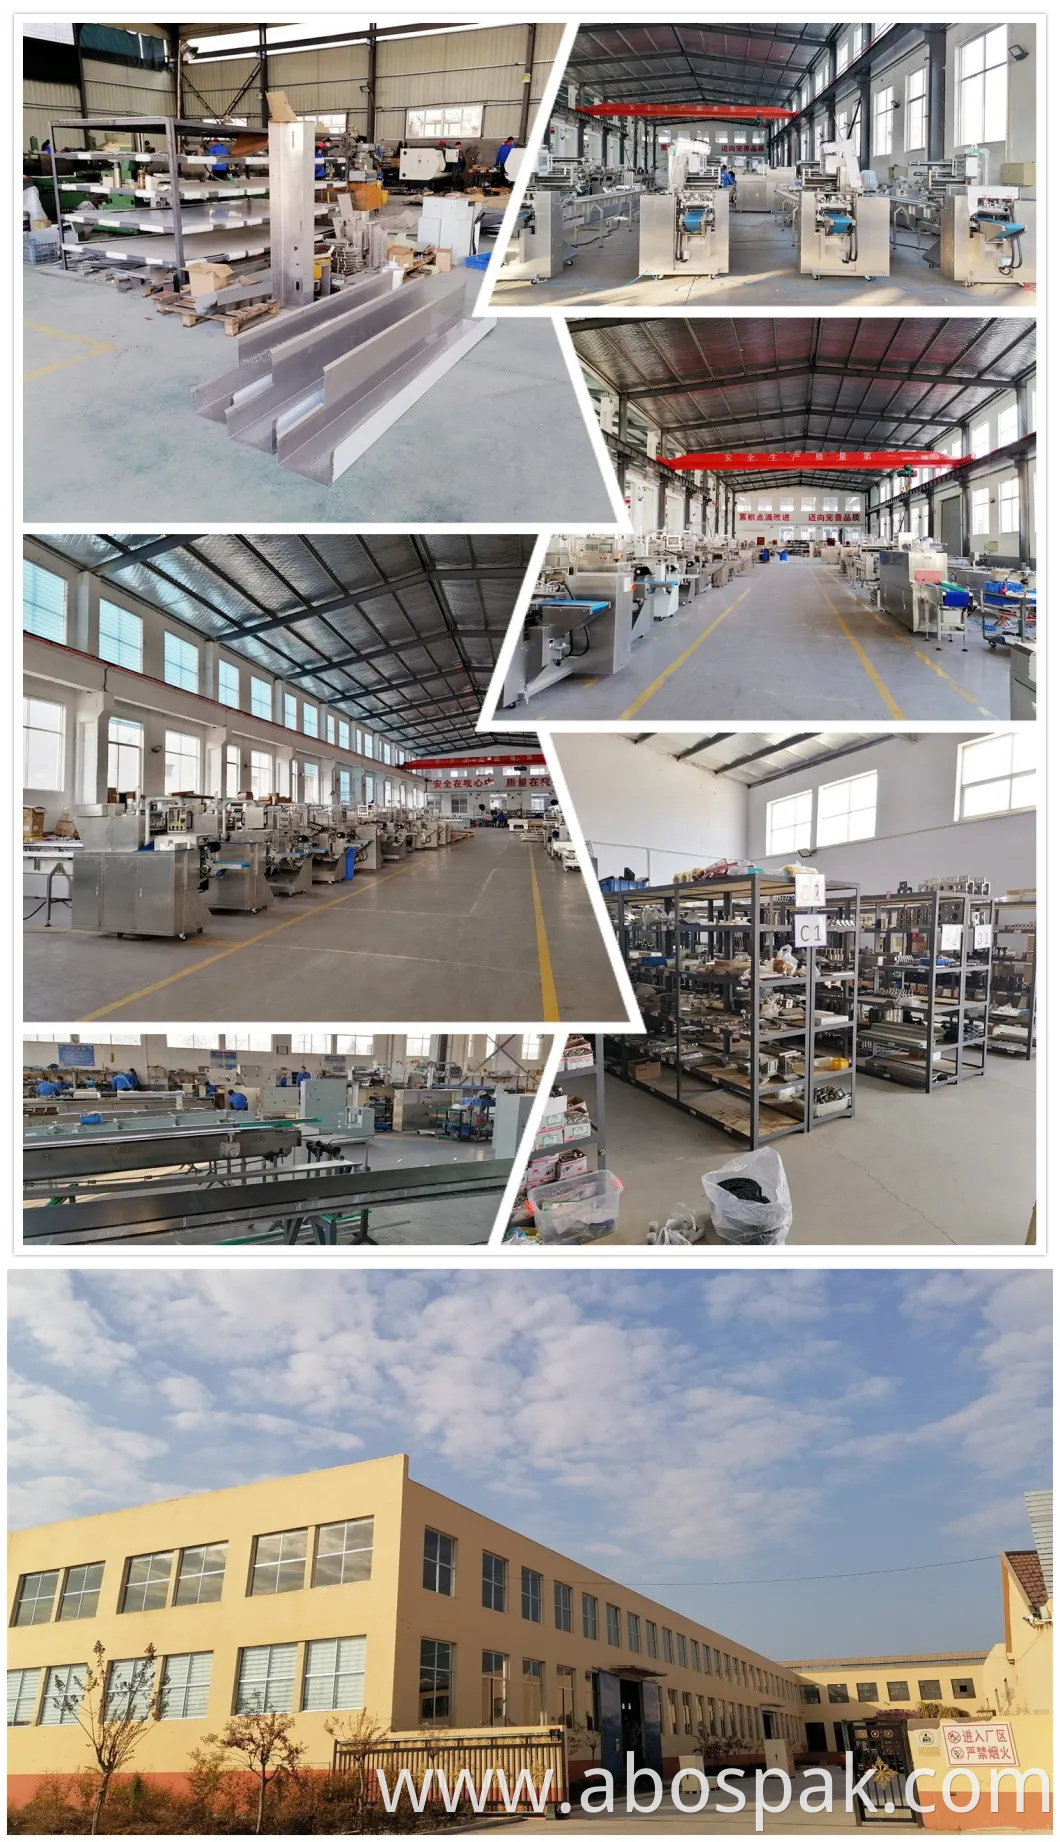 Bostar Automatic Factory Price Horizontal Pouch Large Weighing Sealing Packing Packaging Machine Machinery for Pasta Italian Stick Noodle Spaghetti Food